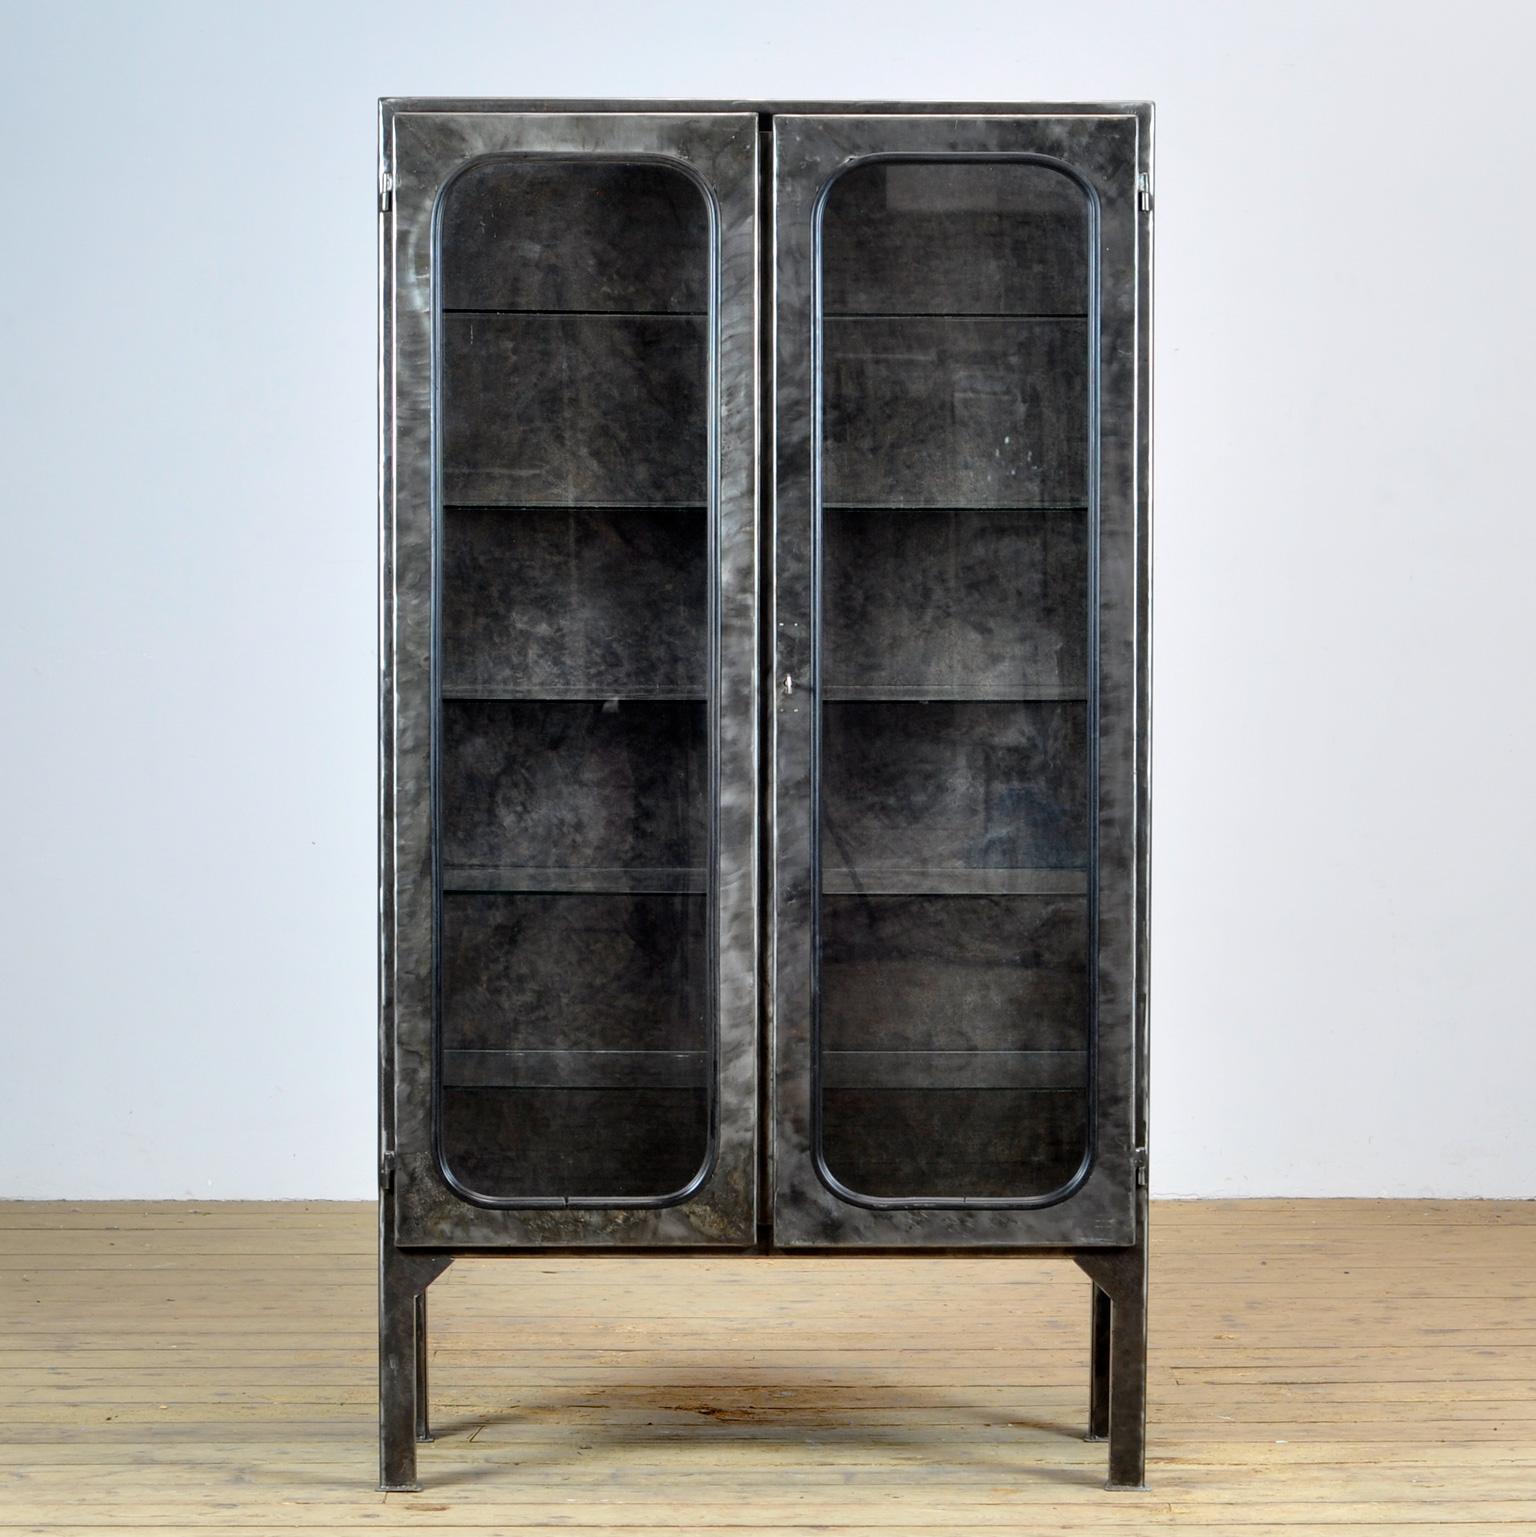 This medical cabinet was designed in the 1970s and was produced circa 1975 in hungary. It is made from iron and glass, which is held by a black rubber strip. The item has been stripped from its paint and finished with a transparant laquer. The